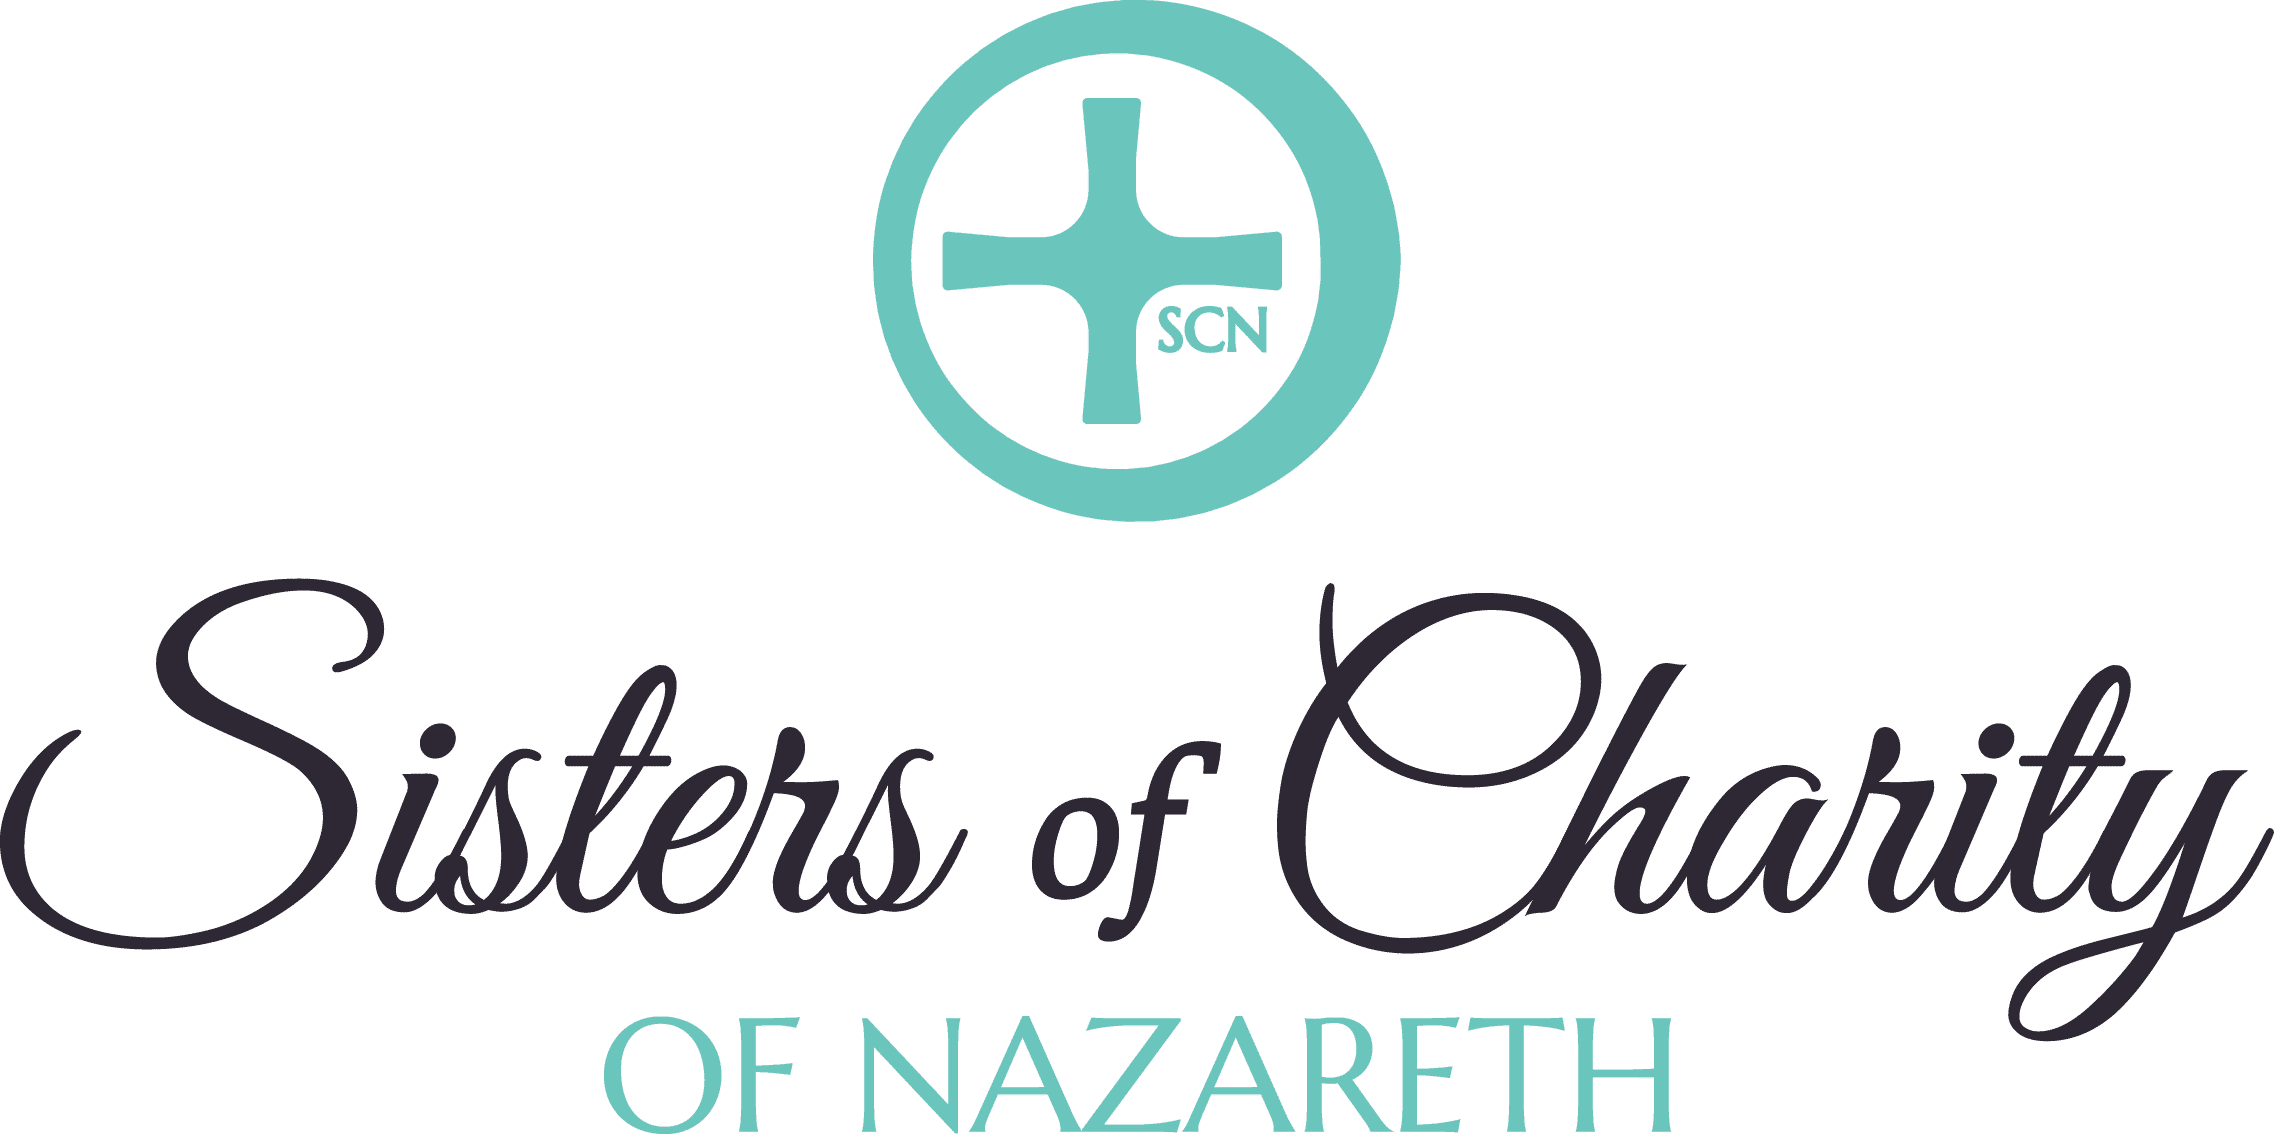 SCN Logo - Brand Components. Sisters of Charity of Nazareth